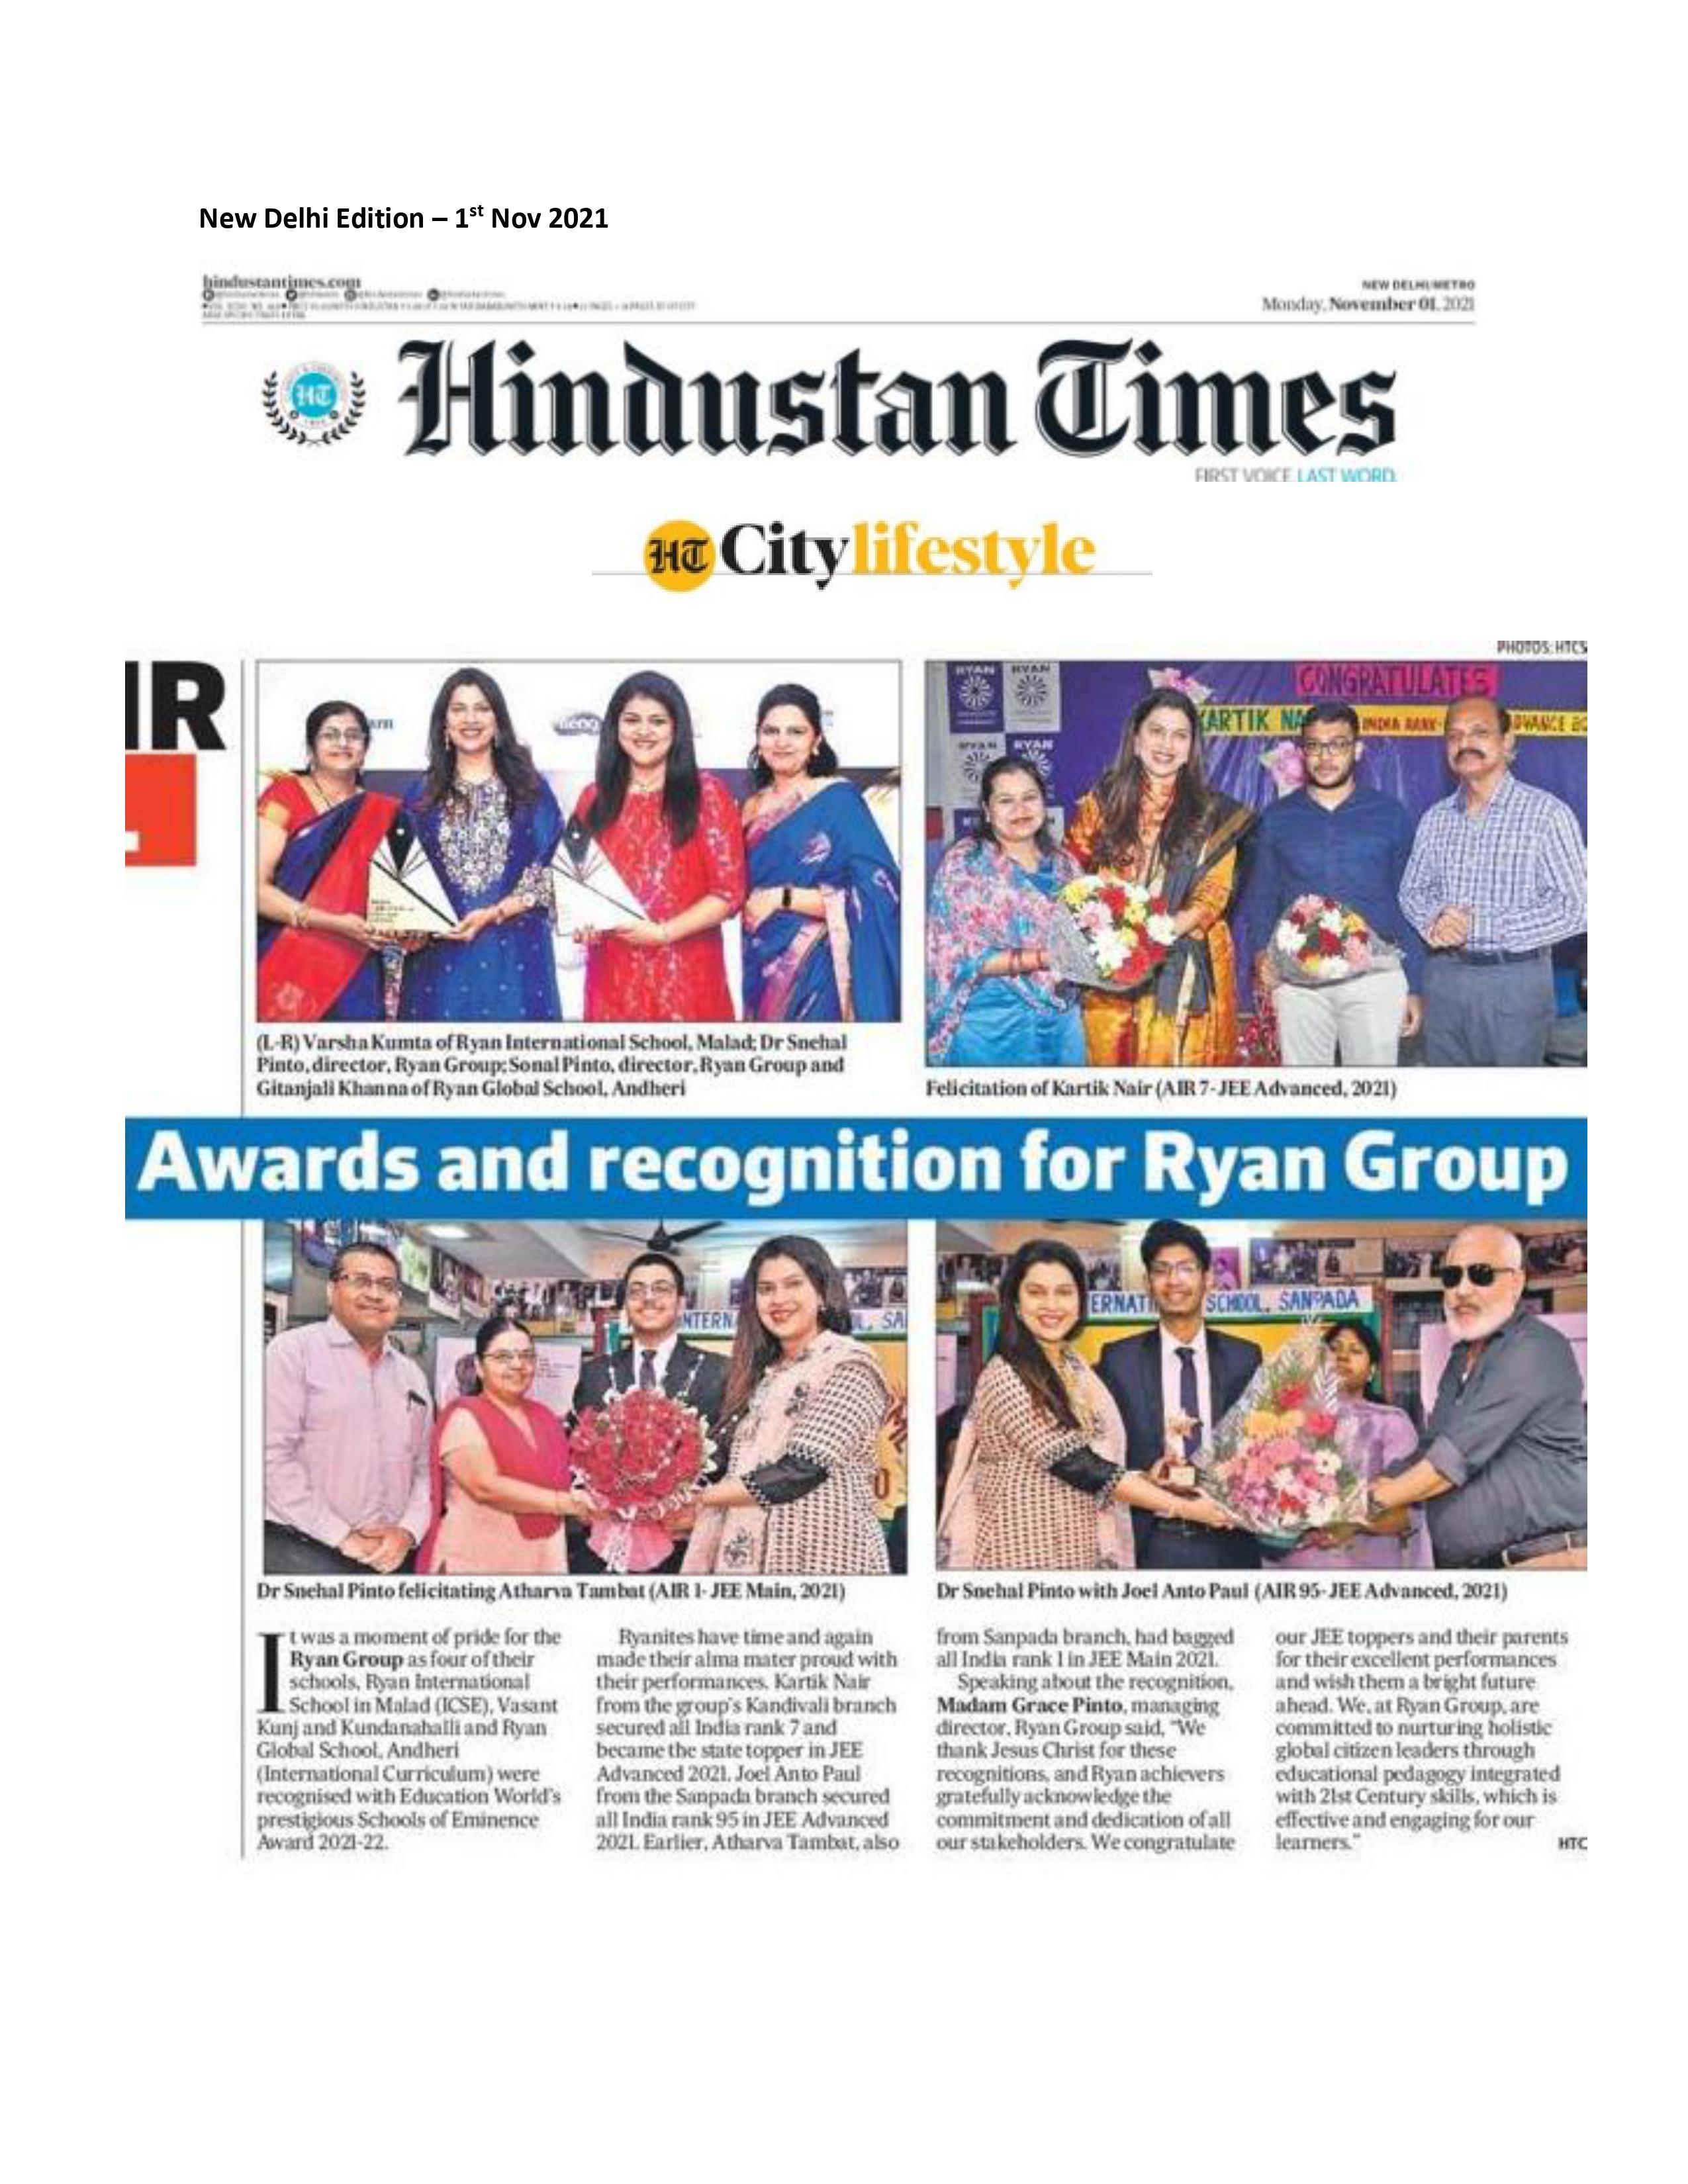 Awards and Recognition for Ryan Group